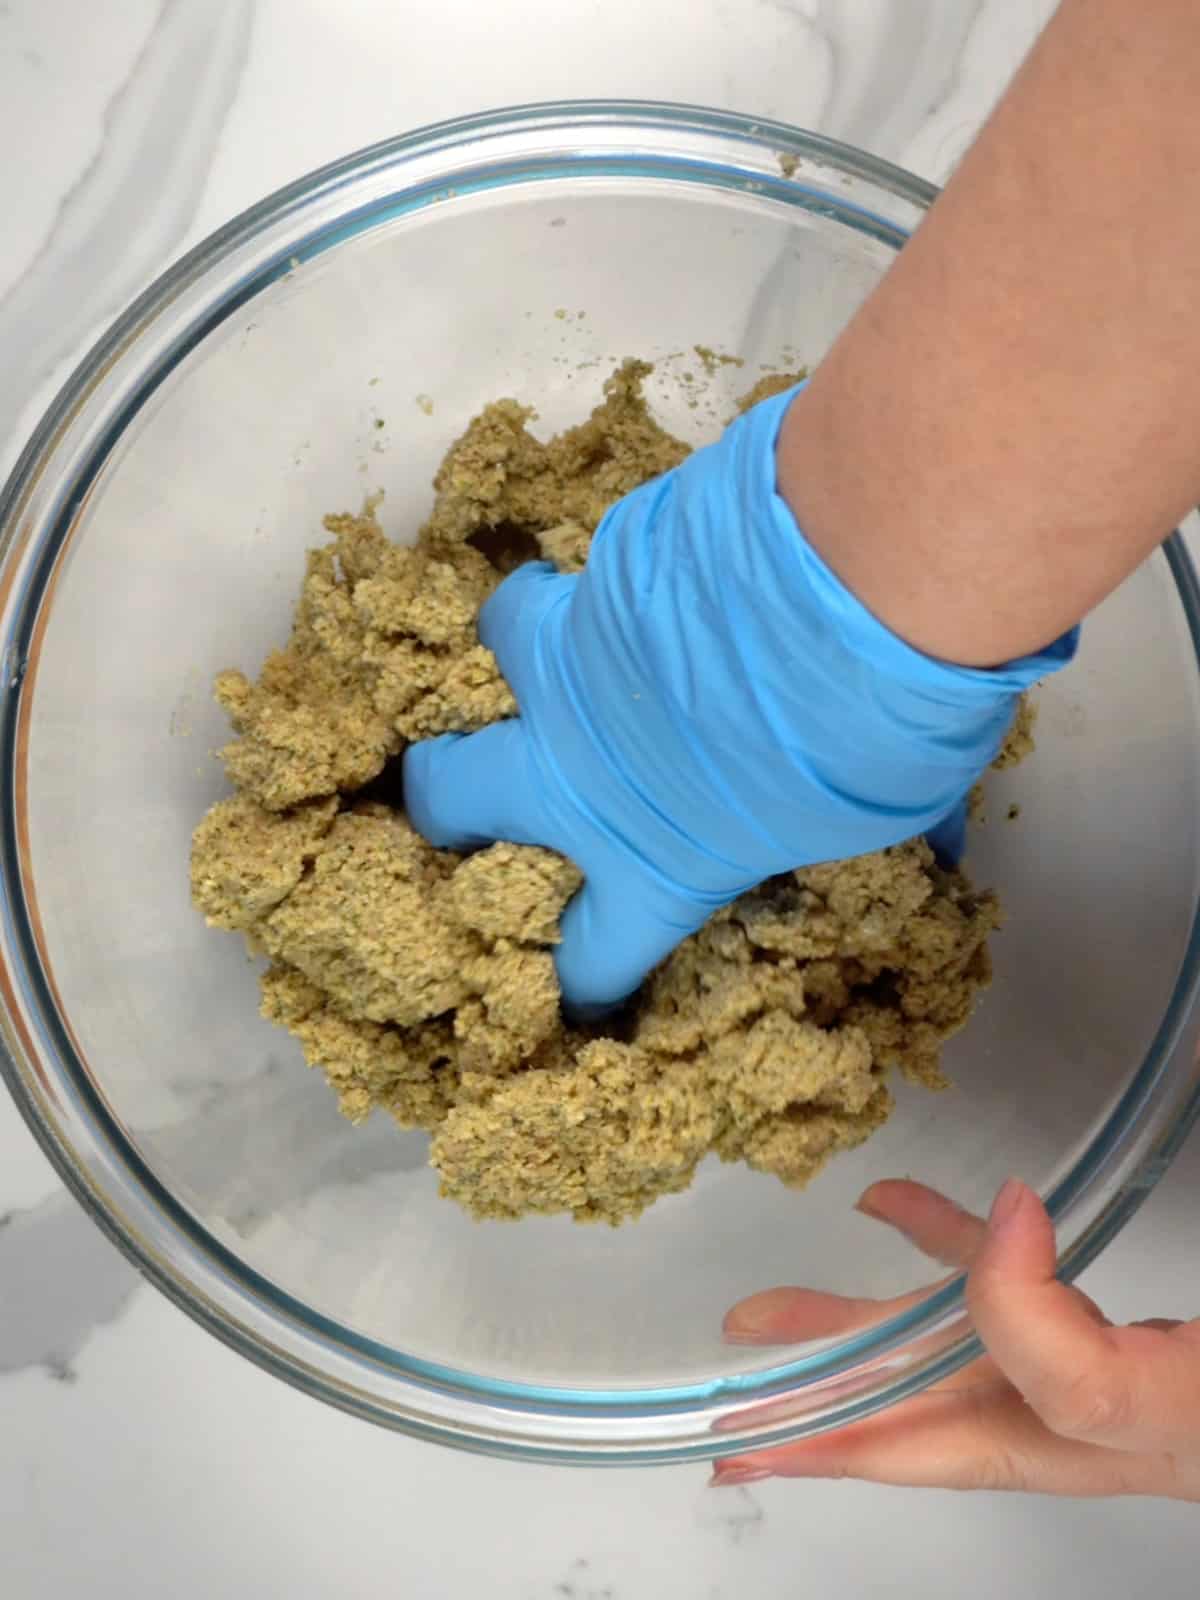 a female hand with a blue glove kneading the falafel mixture